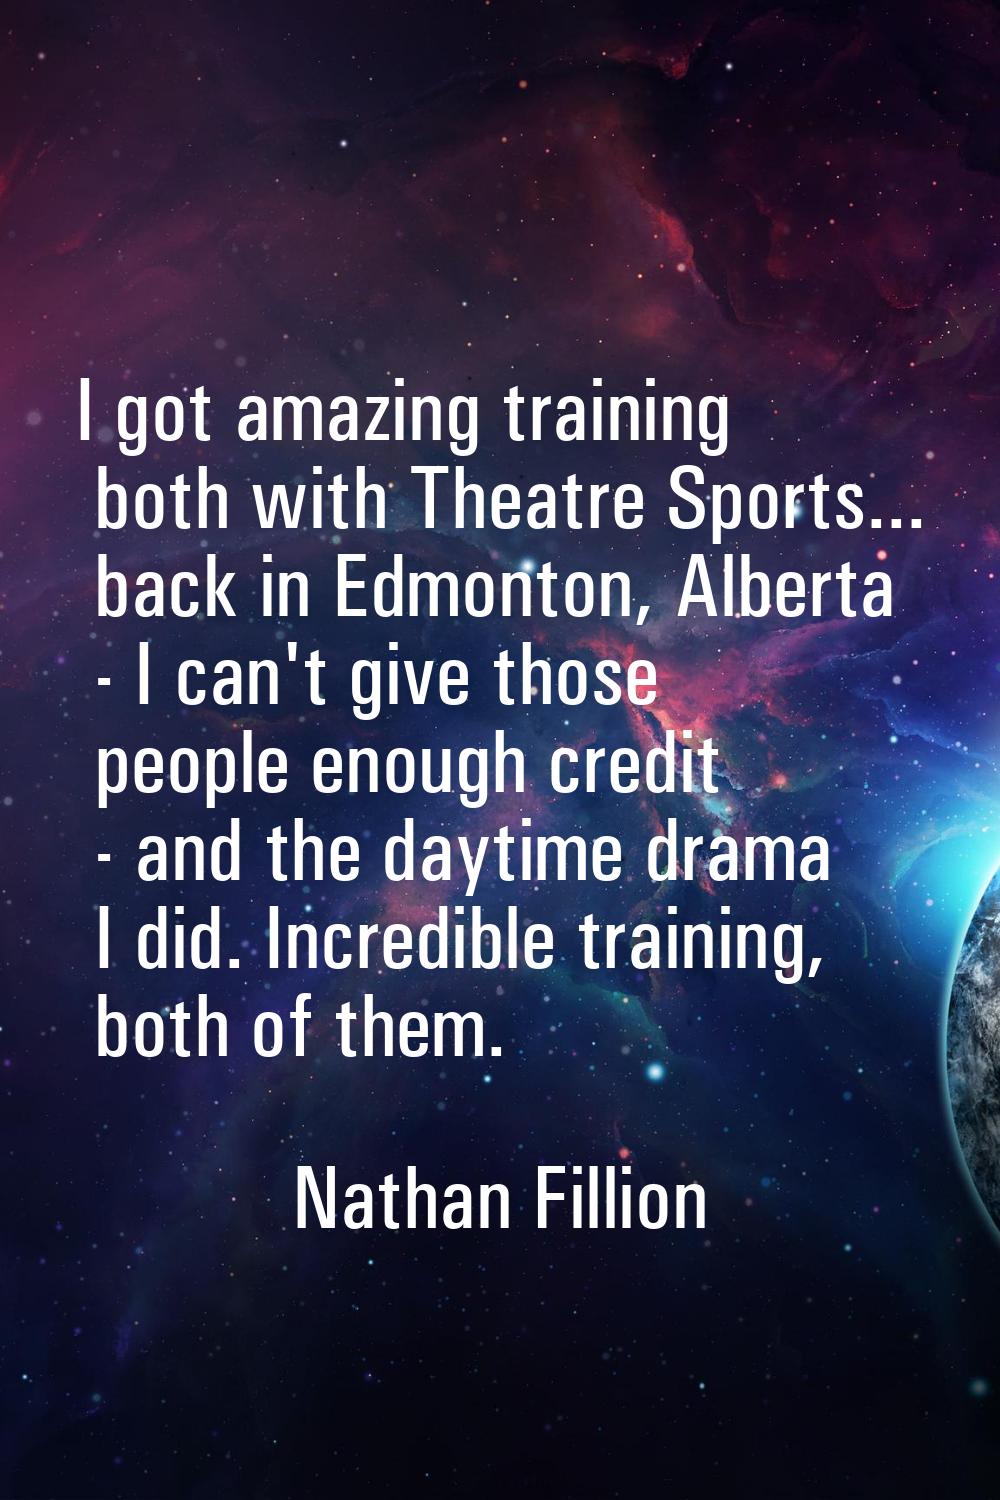 I got amazing training both with Theatre Sports... back in Edmonton, Alberta - I can't give those p